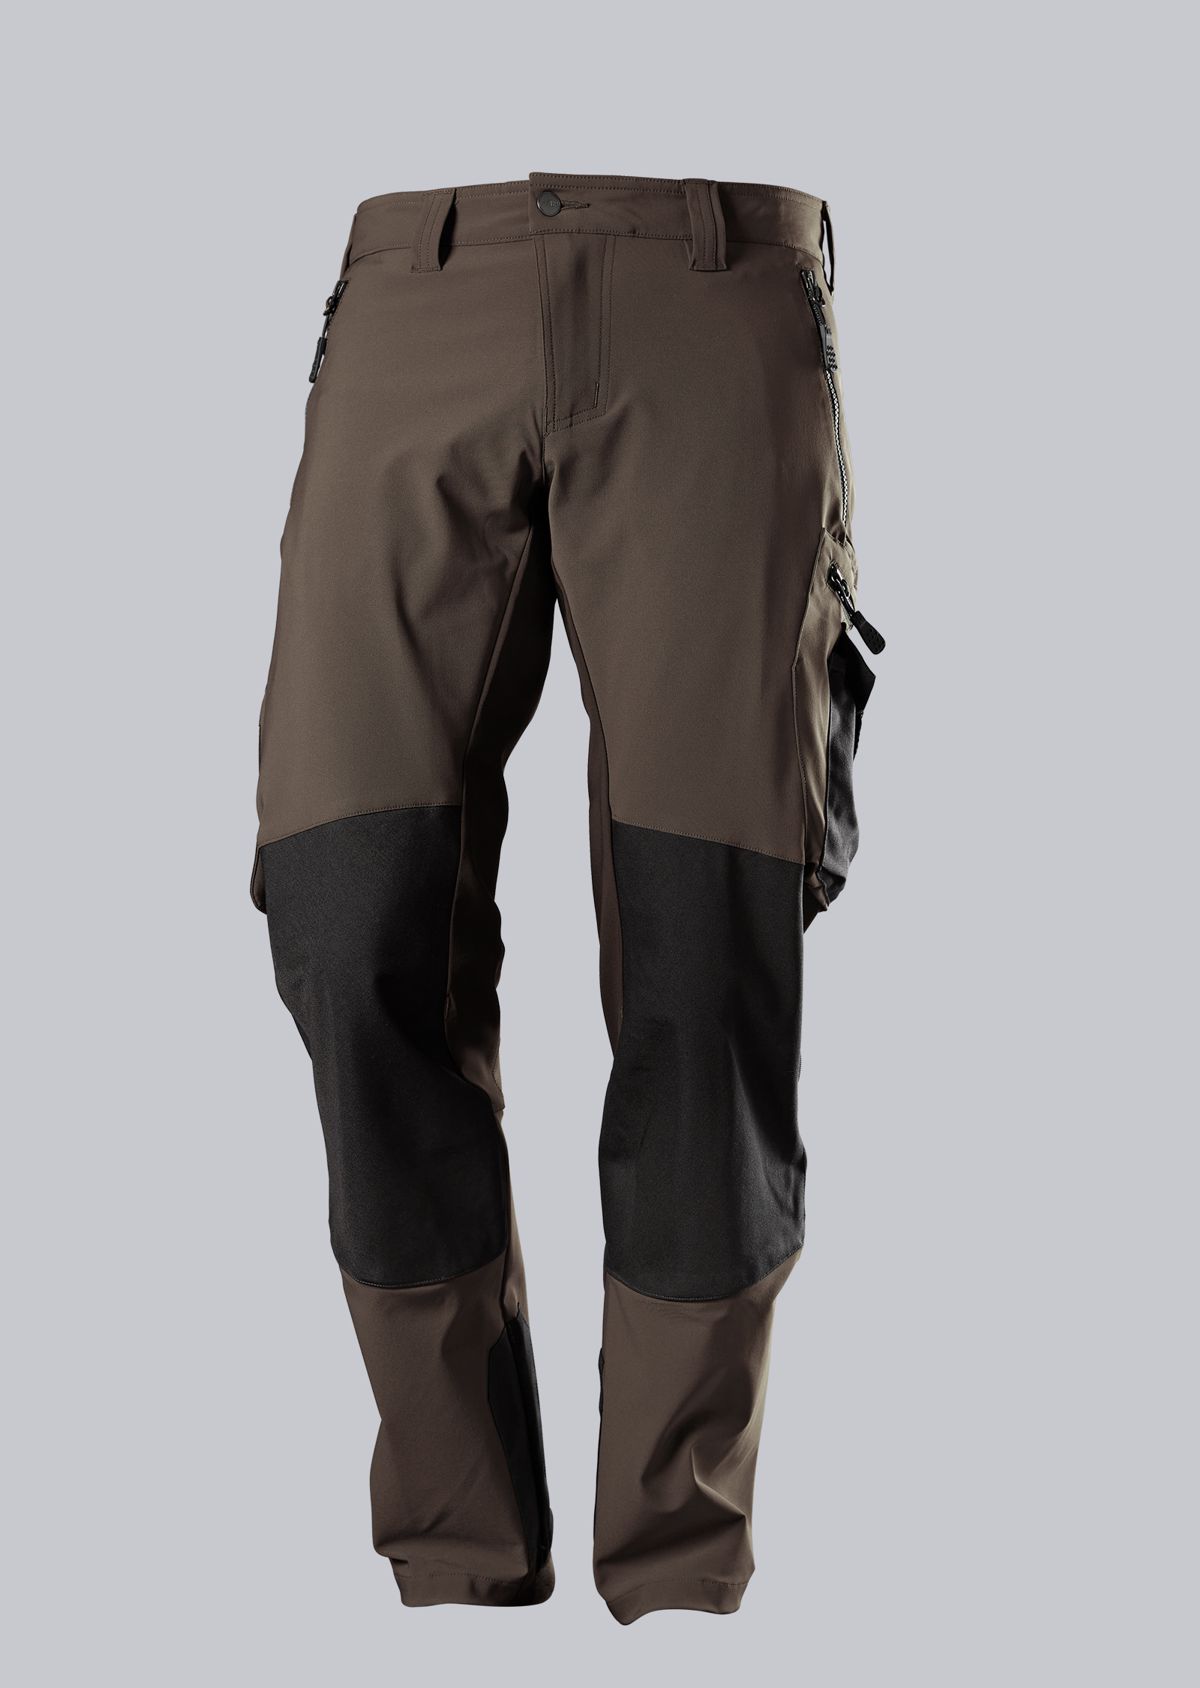 BP® Super-stretch work trousers with knee pad pockets